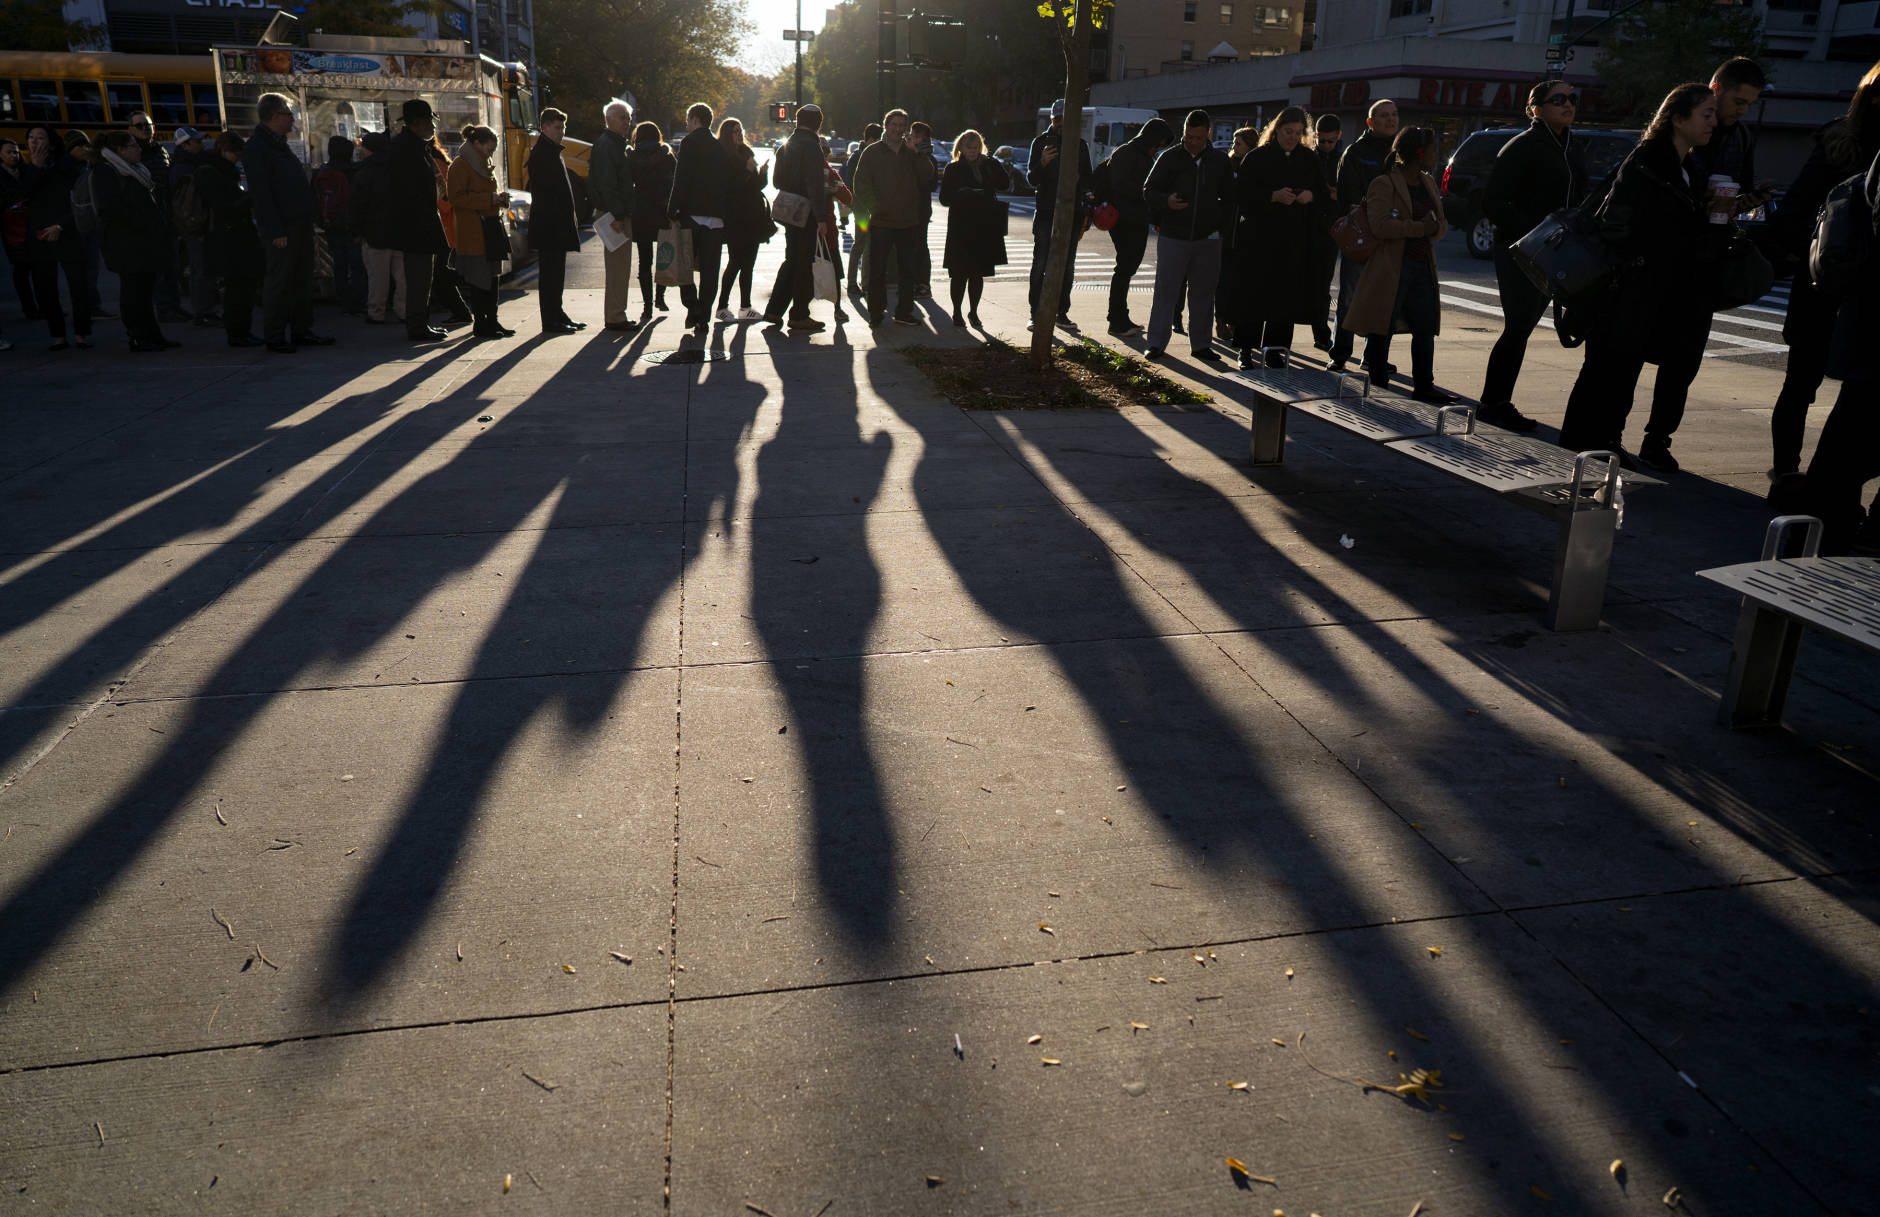 A line forms as people wait to vote on Election Day in the Upper West Side of Manhattan on Tuesday, Nov. 8, 2016, in New York. (AP Photo/Craig Ruttle)